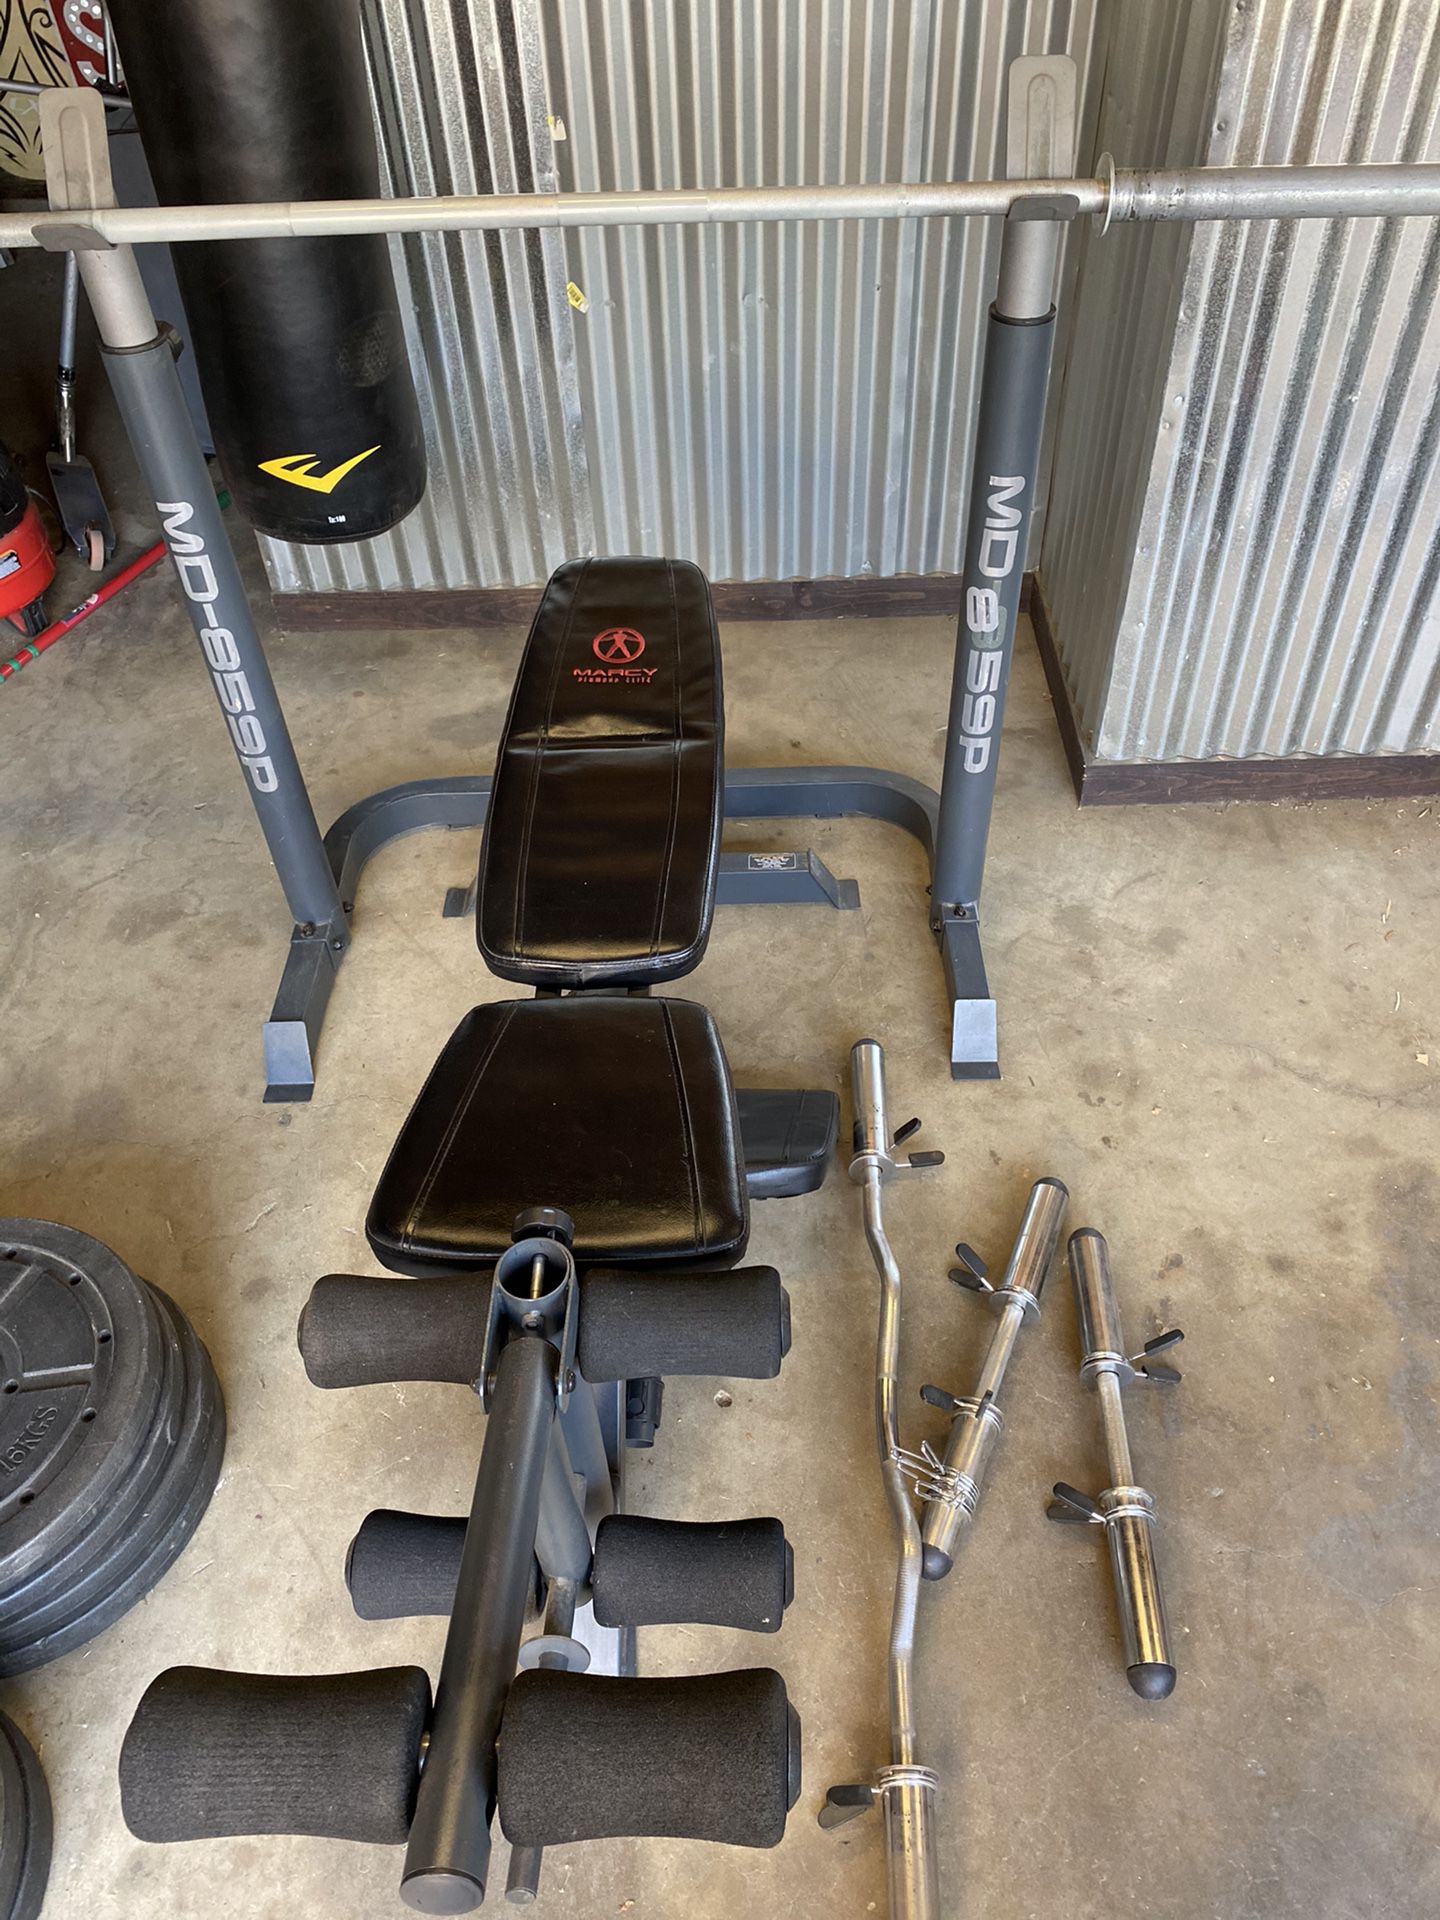 Marcy weight bench, bars, 35/25/10 plates in great shape!!